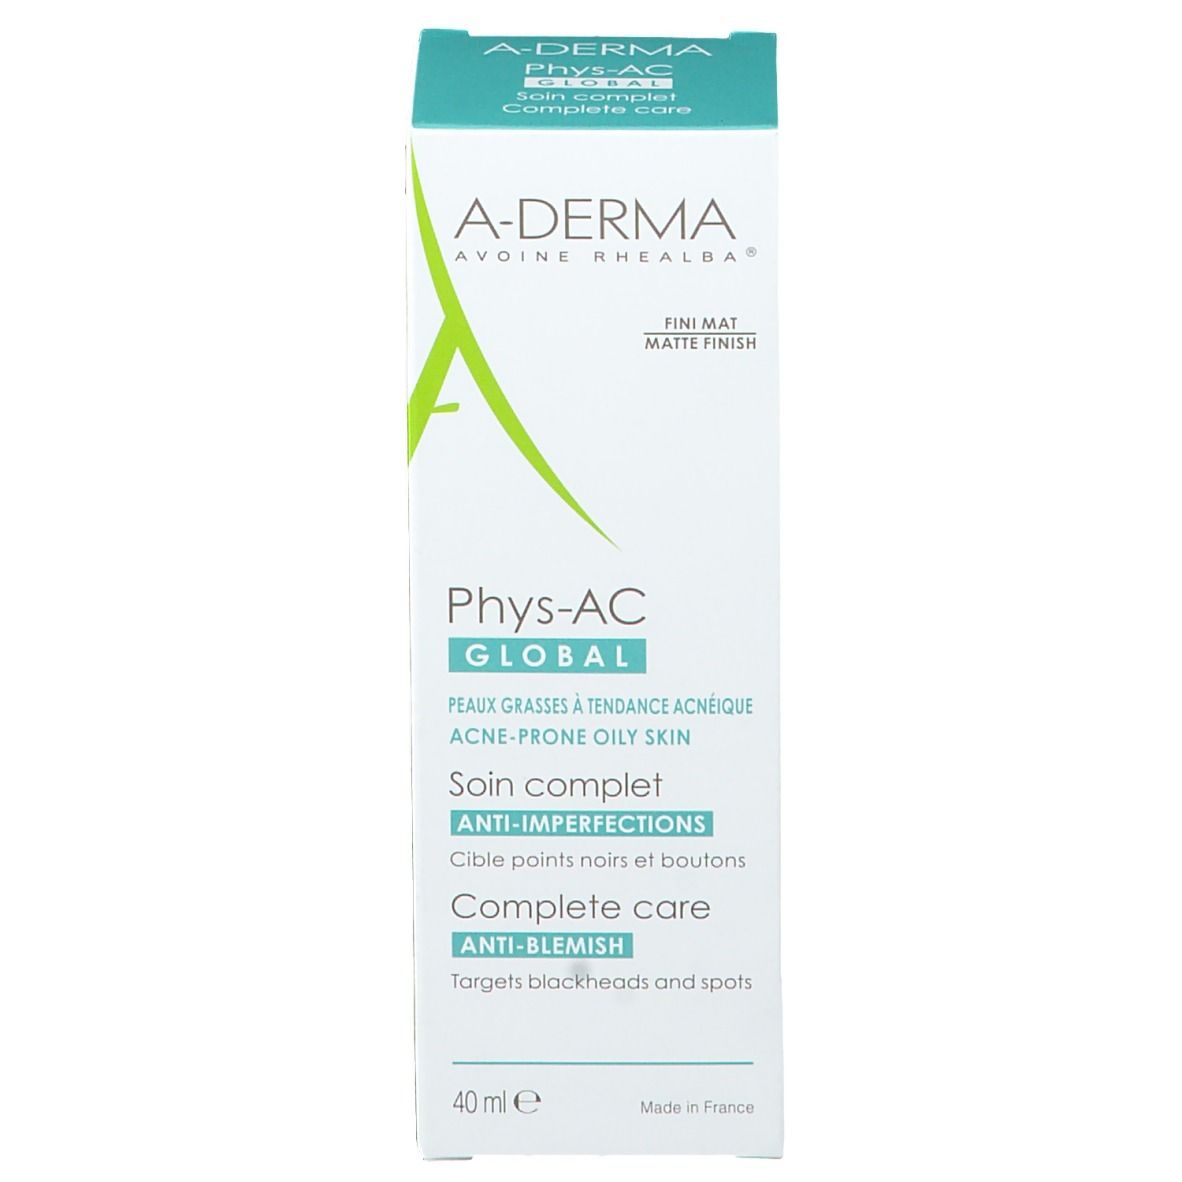 A-Derma Phys-AC Global Soin Complet Anti-Imperfections